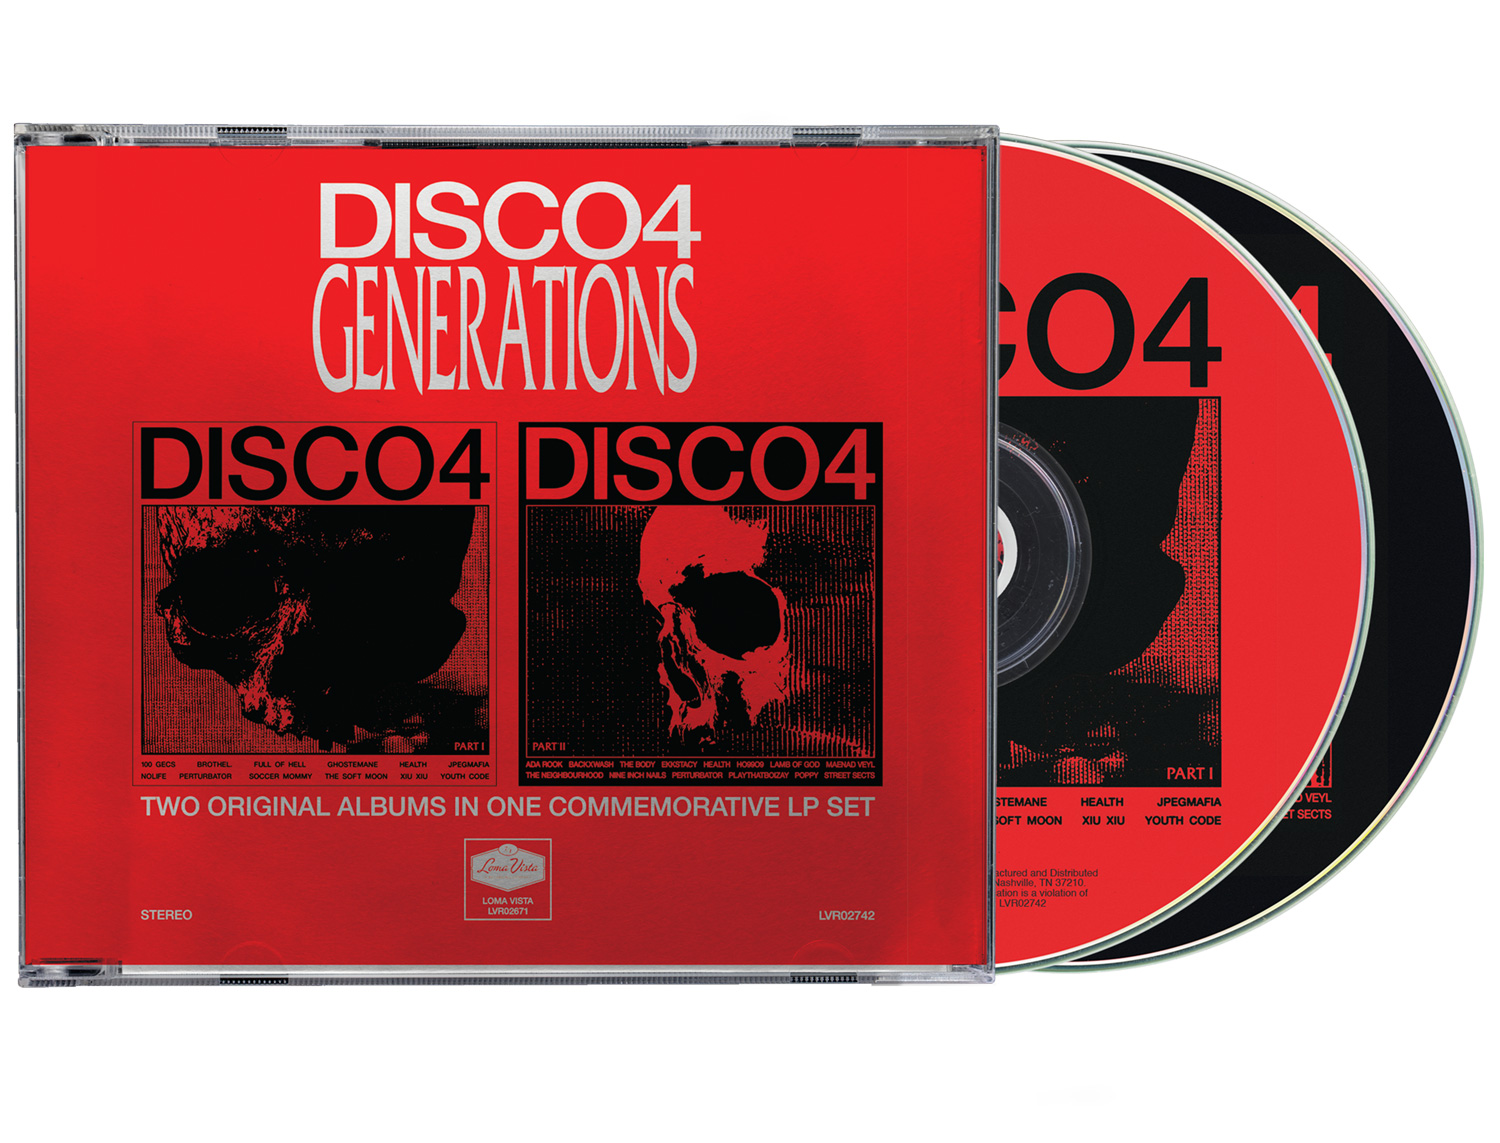 [PREORDER] DISCO4 :: GENERATIONS DOUBLE CD SET